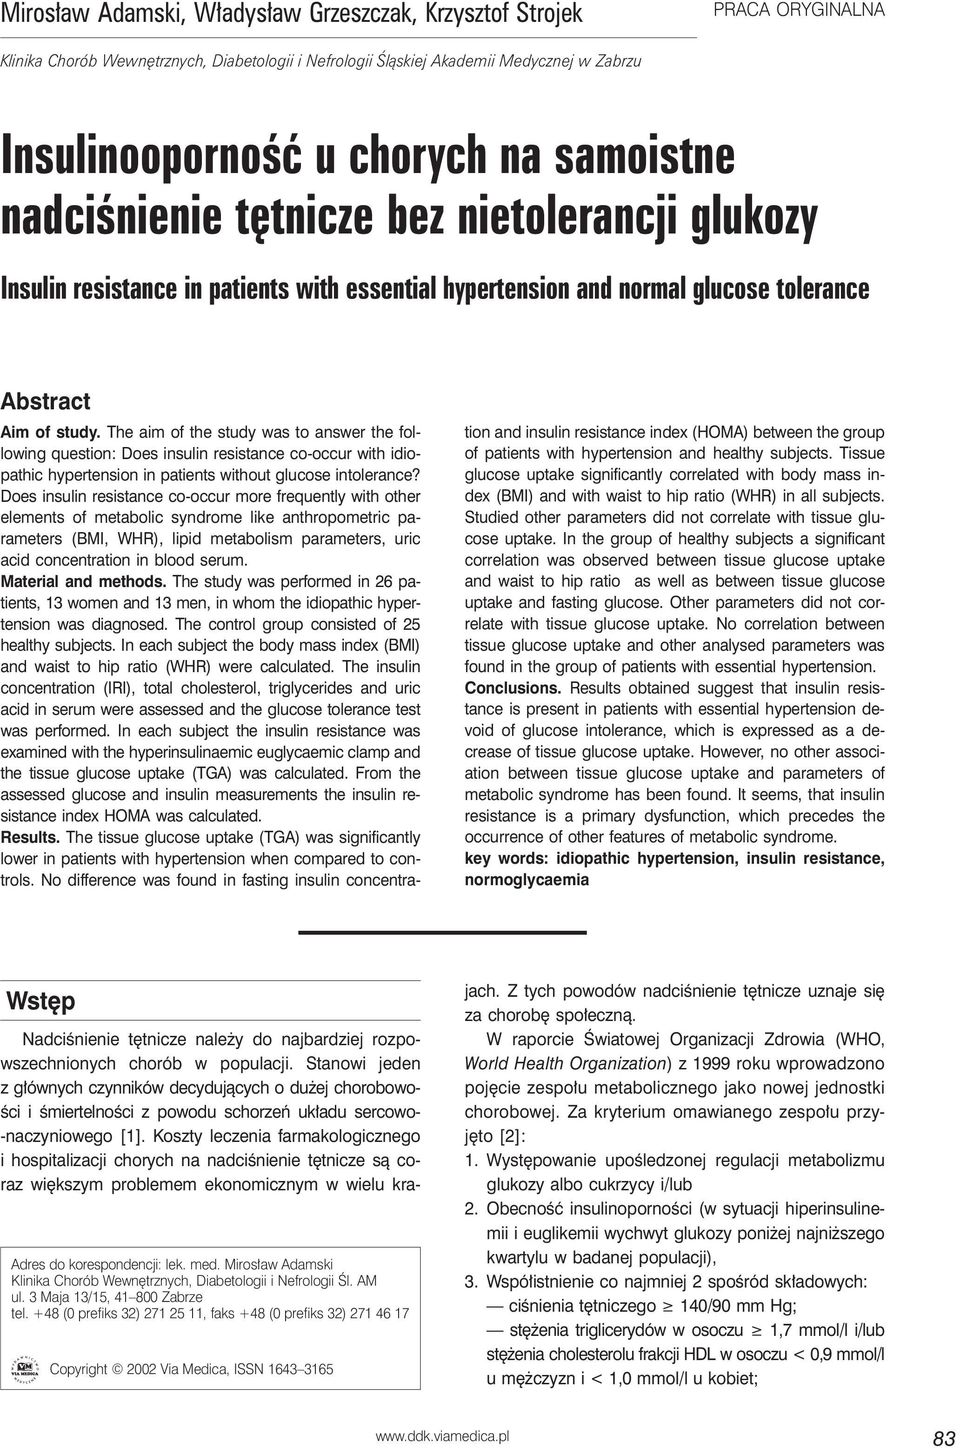 The aim of the study was to answer the following question: Does insulin resistance co-occur with idiopathic hypertension in patients without glucose intolerance?